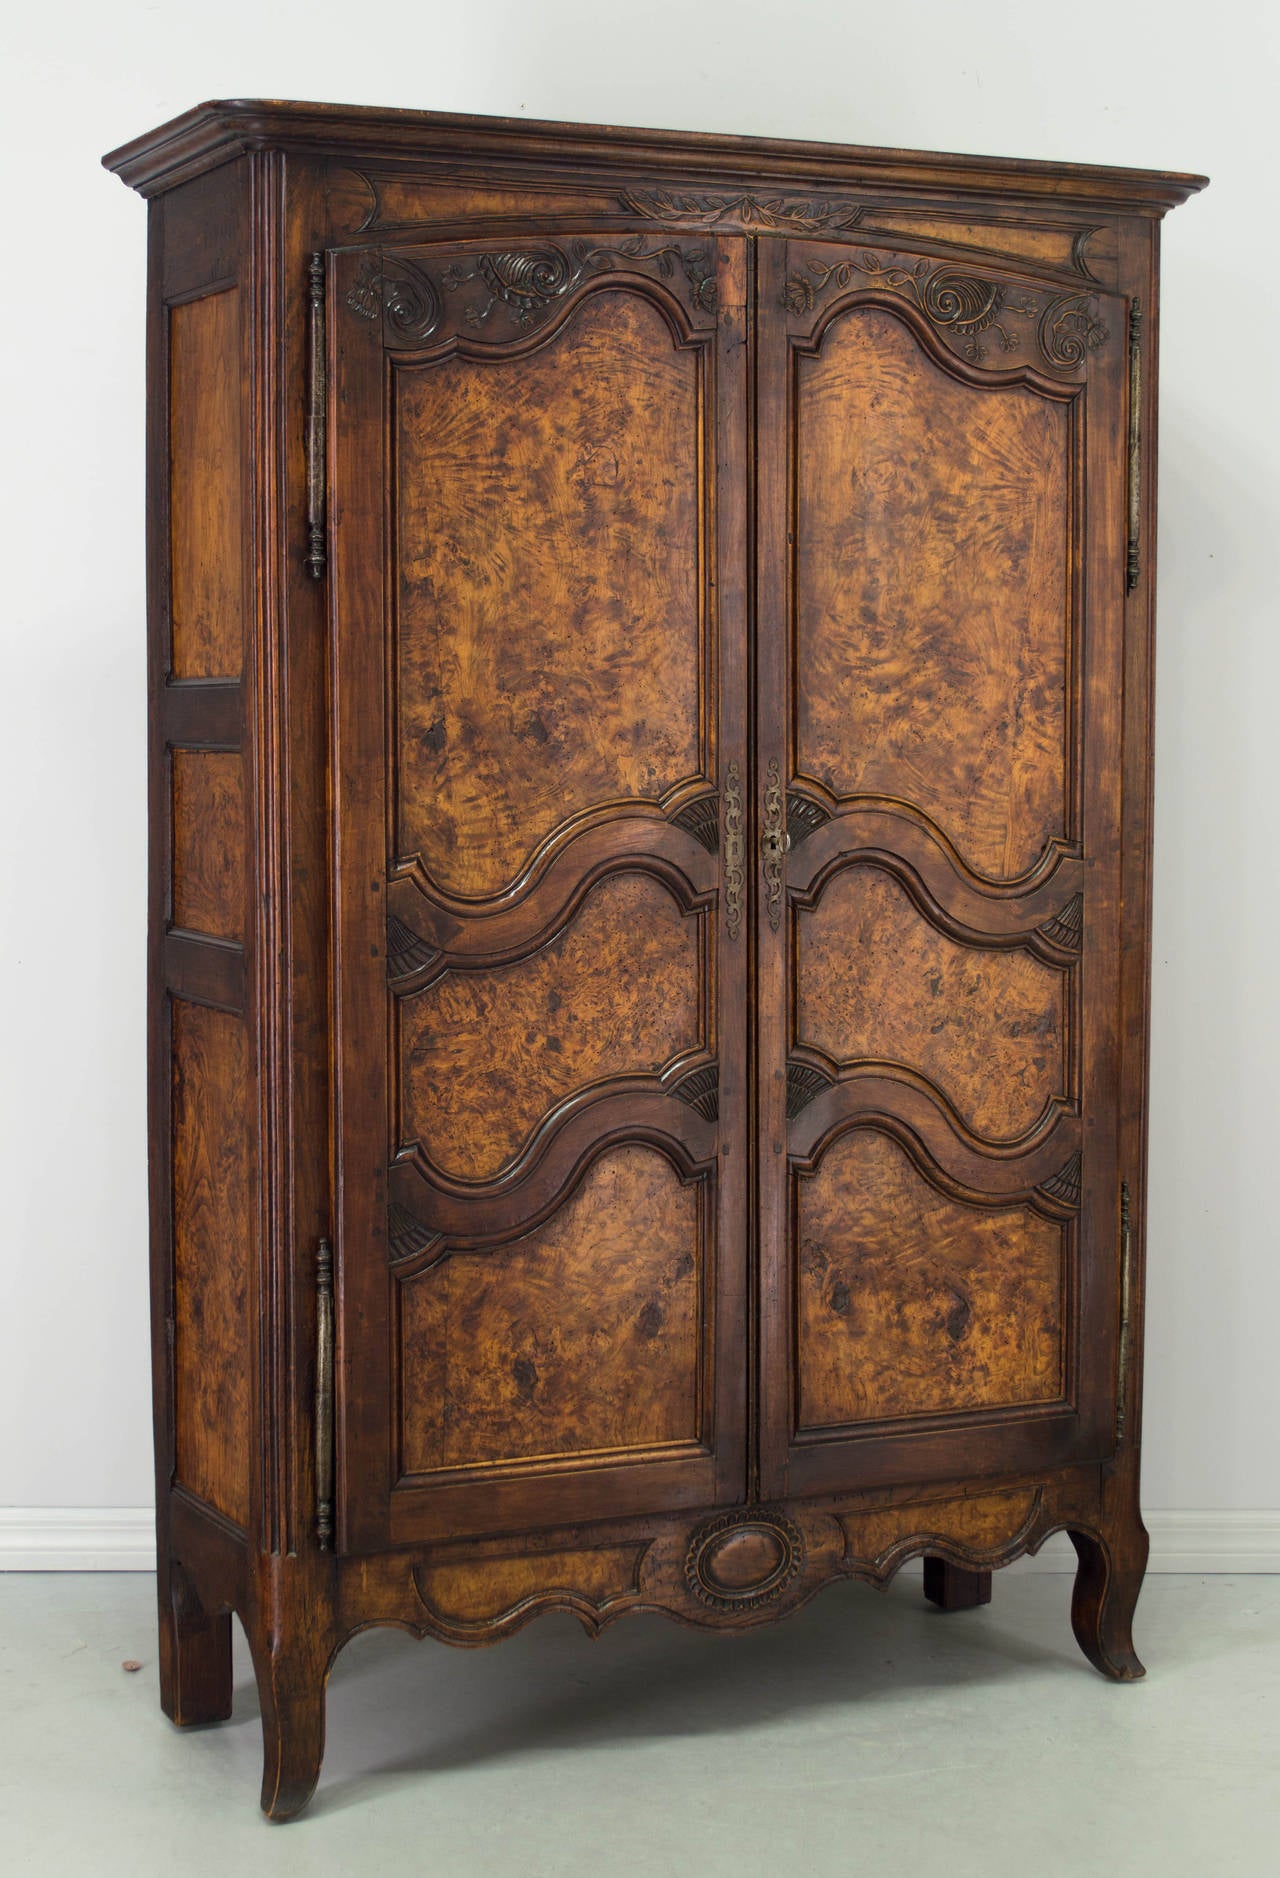 18th century French burl wood armoire from Burgundy made of solid walnut with nice hand-carved details. The doors and side panels are made of beautiful burl of elmwood. This armoire is small in scale (almost 70" high) and was used as a